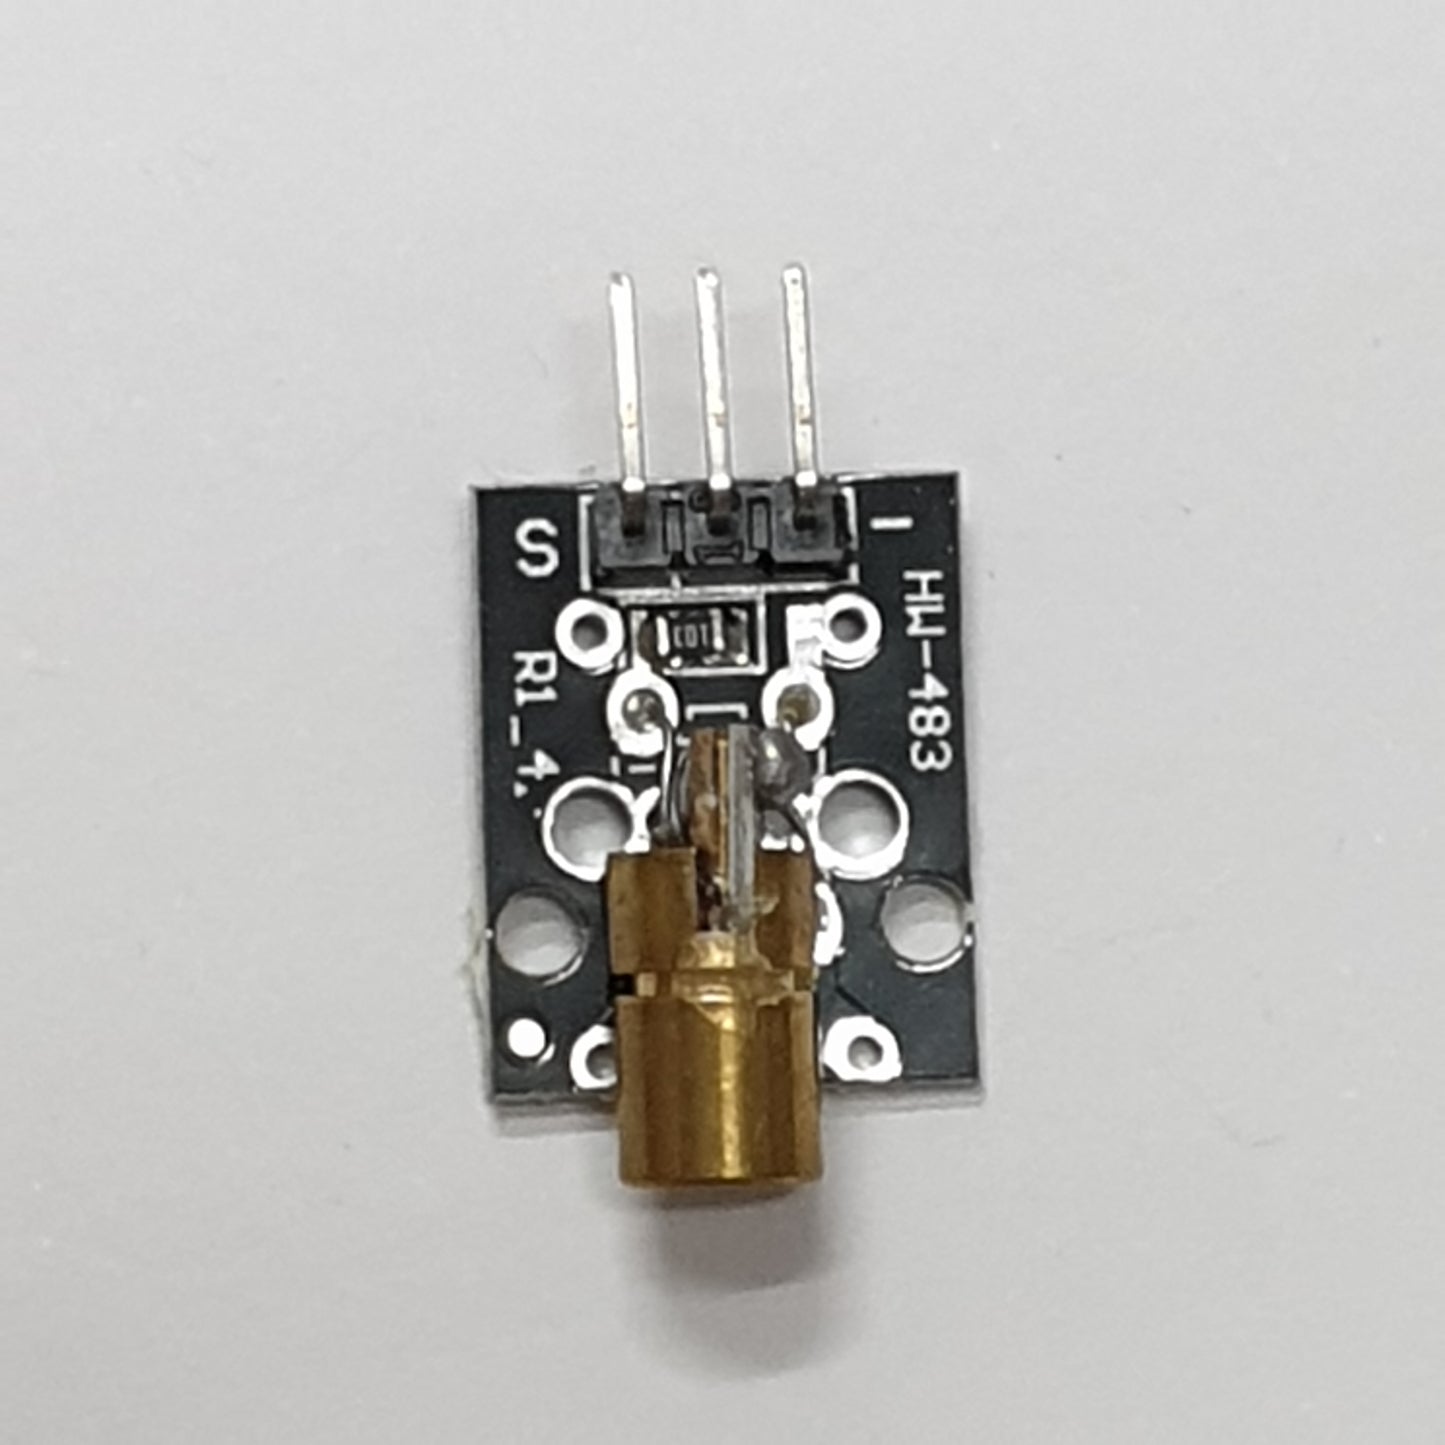 Laser Pointing Module/Component